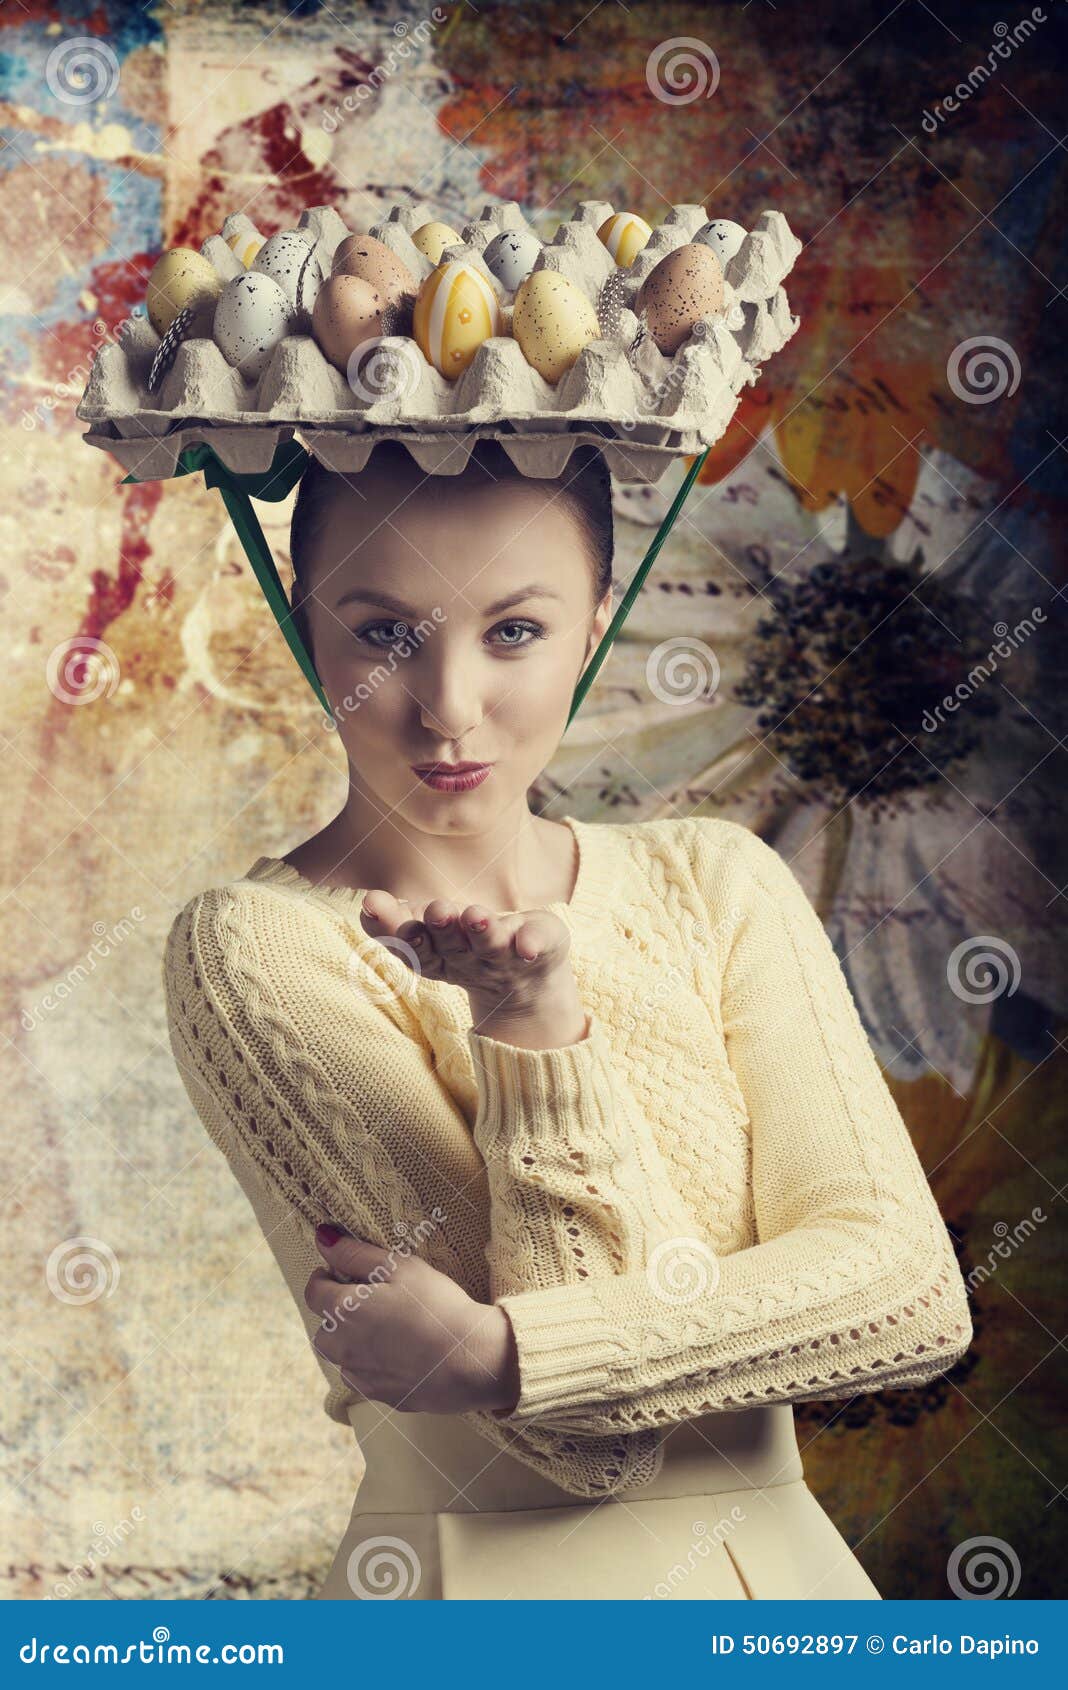 Funny Woman With Easter Eggs Stock Photo - Image: 50692897